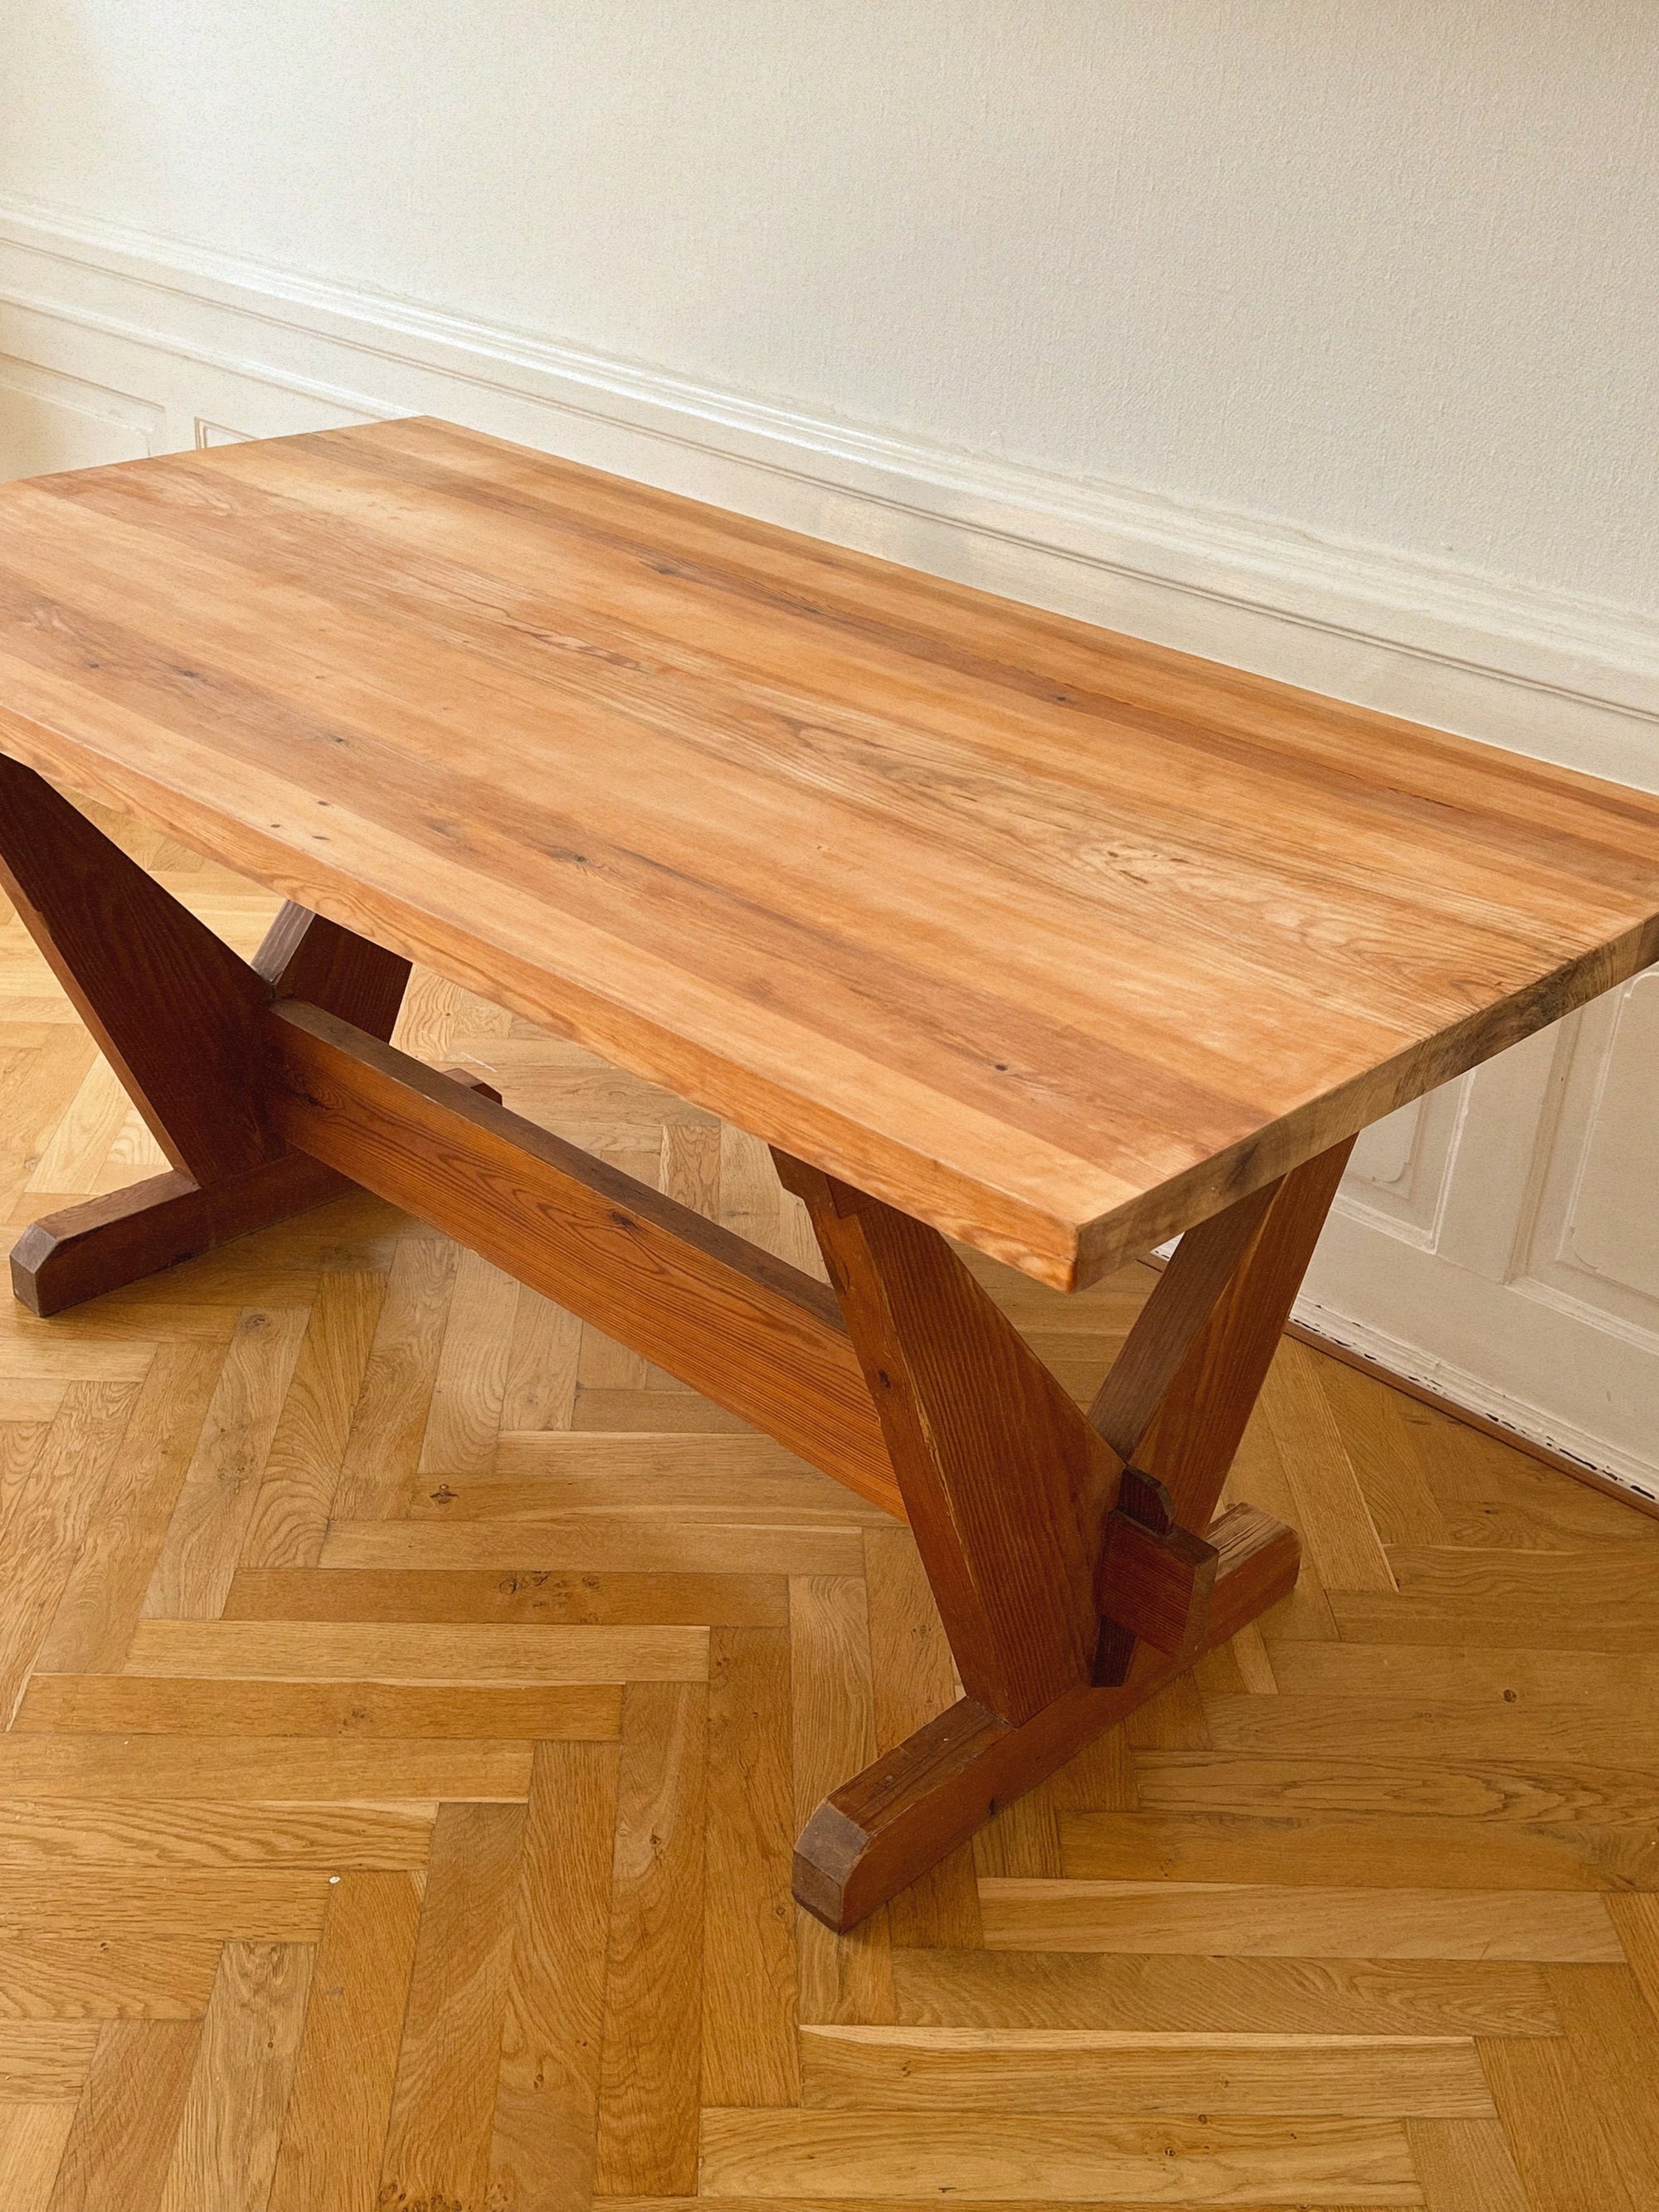 Solid pine wood table